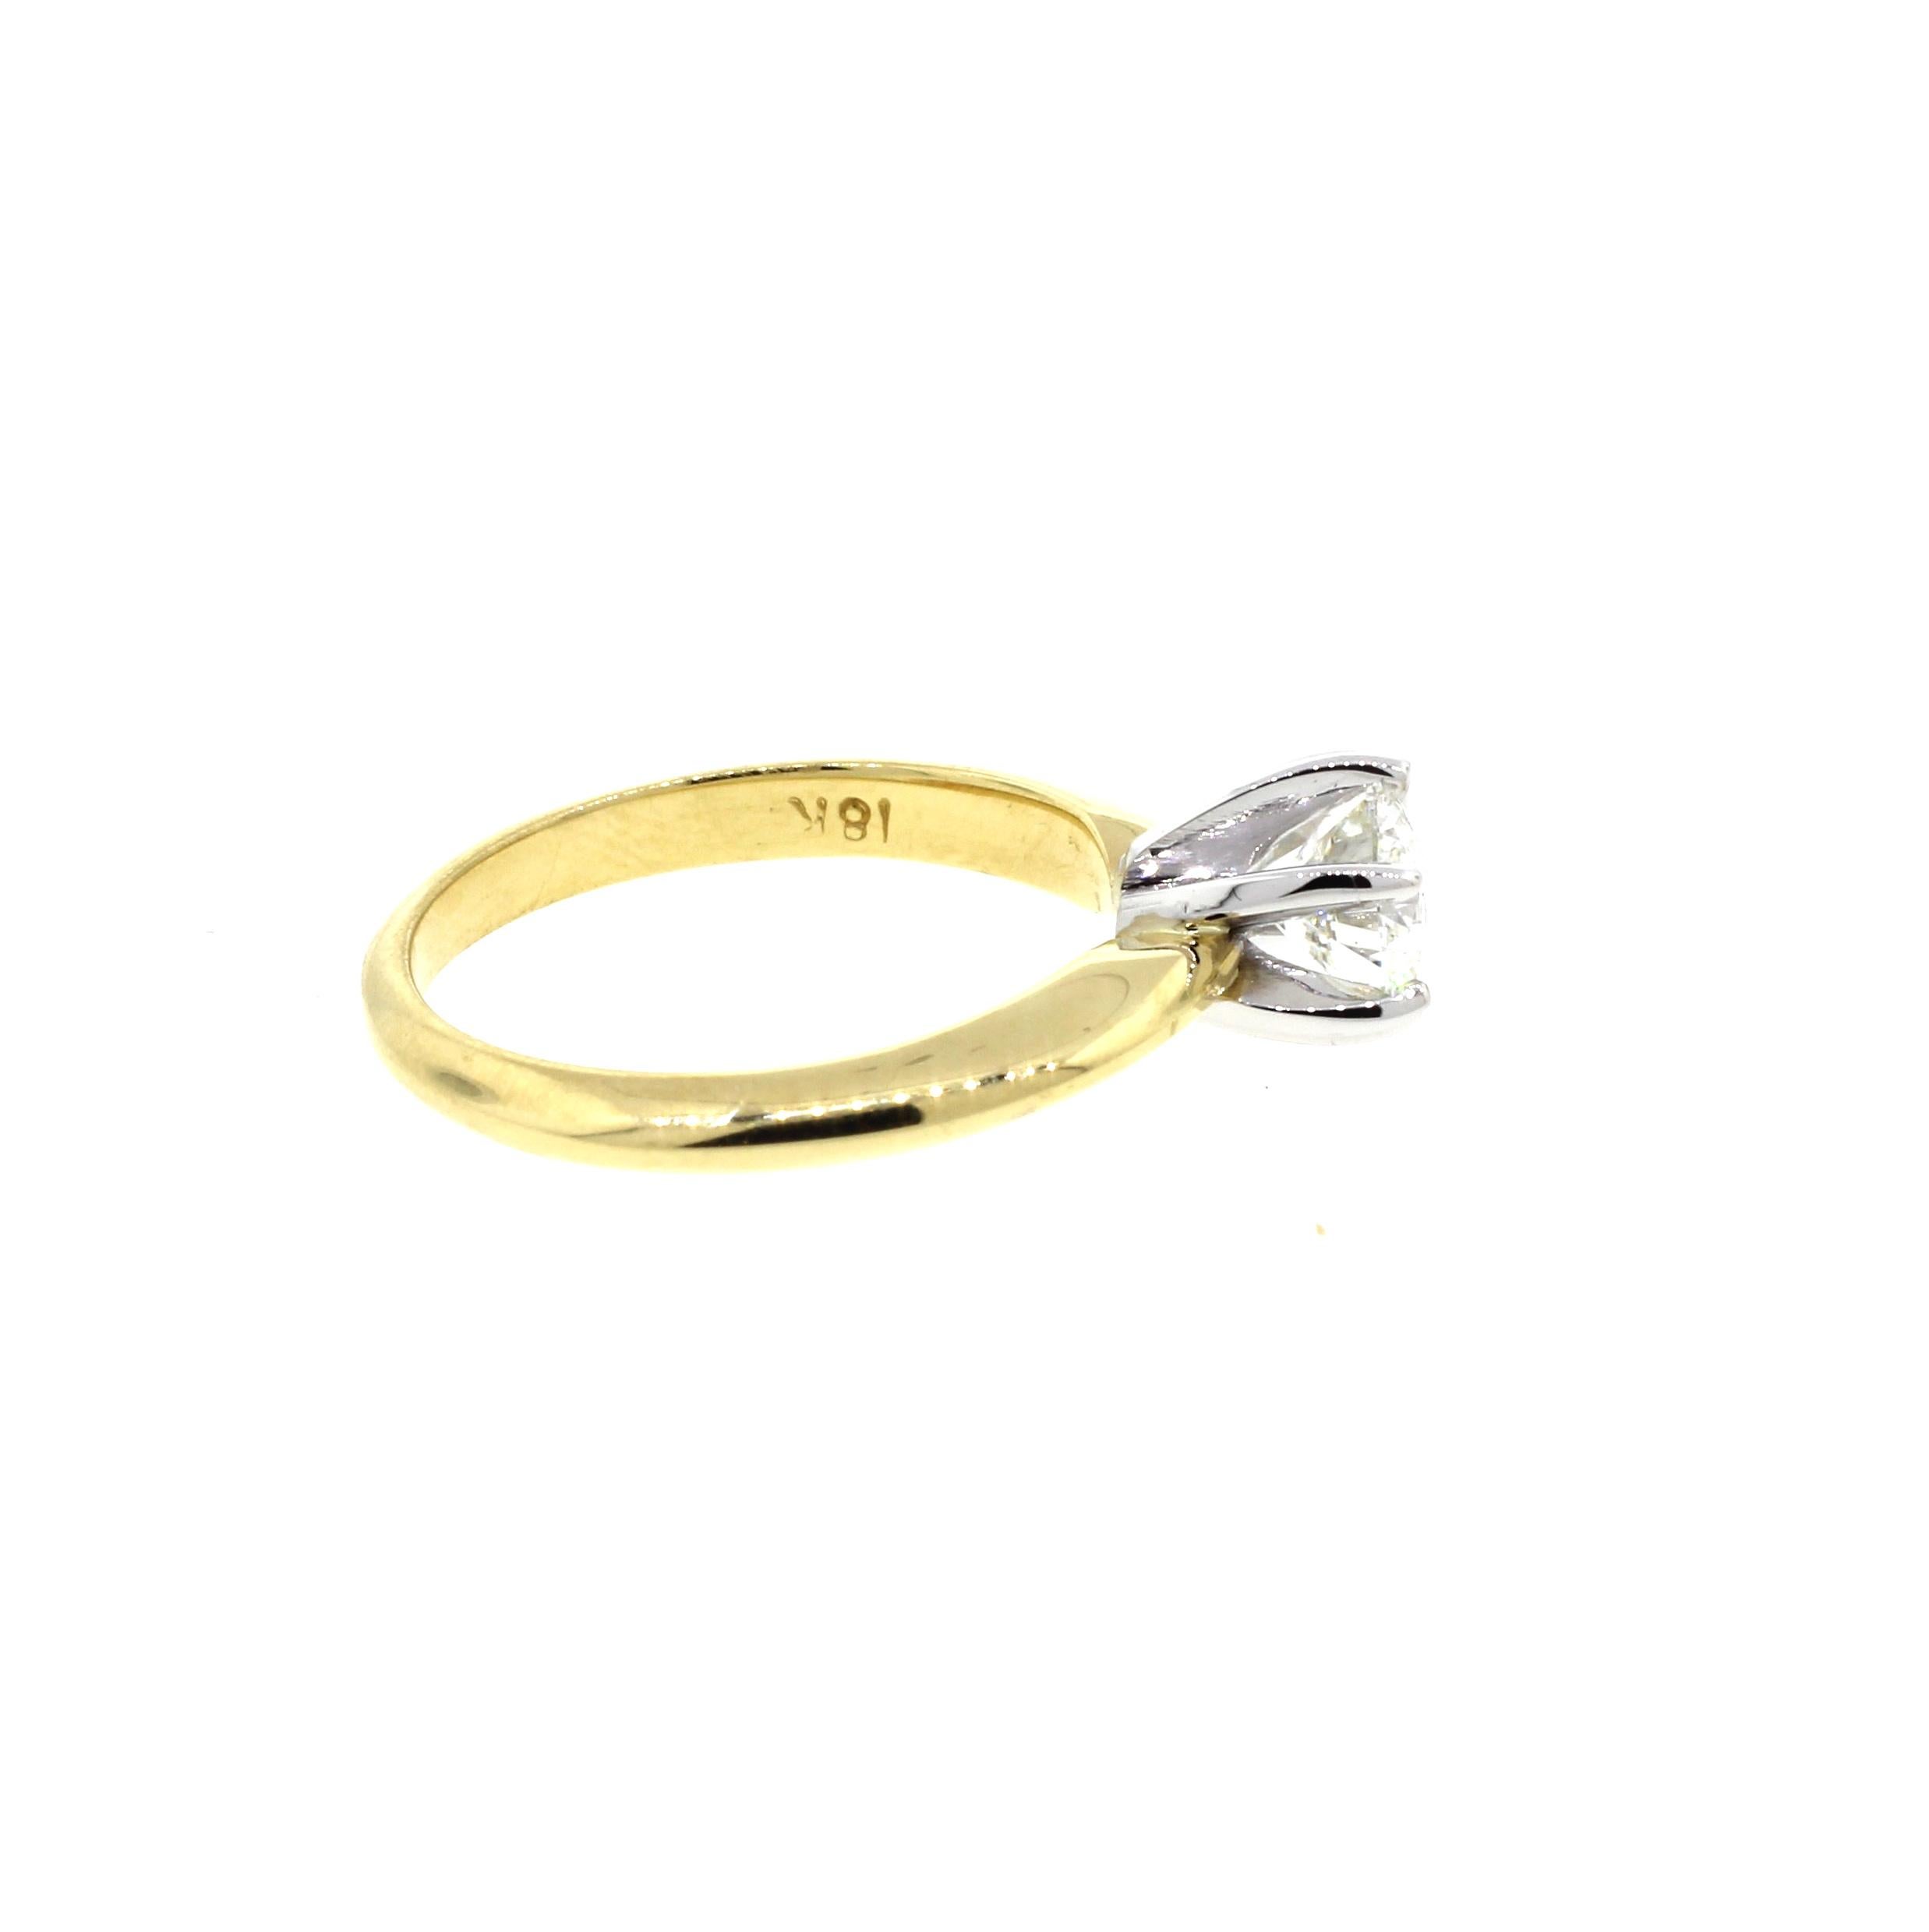 1 ct yellow gold solitaire engagement ring